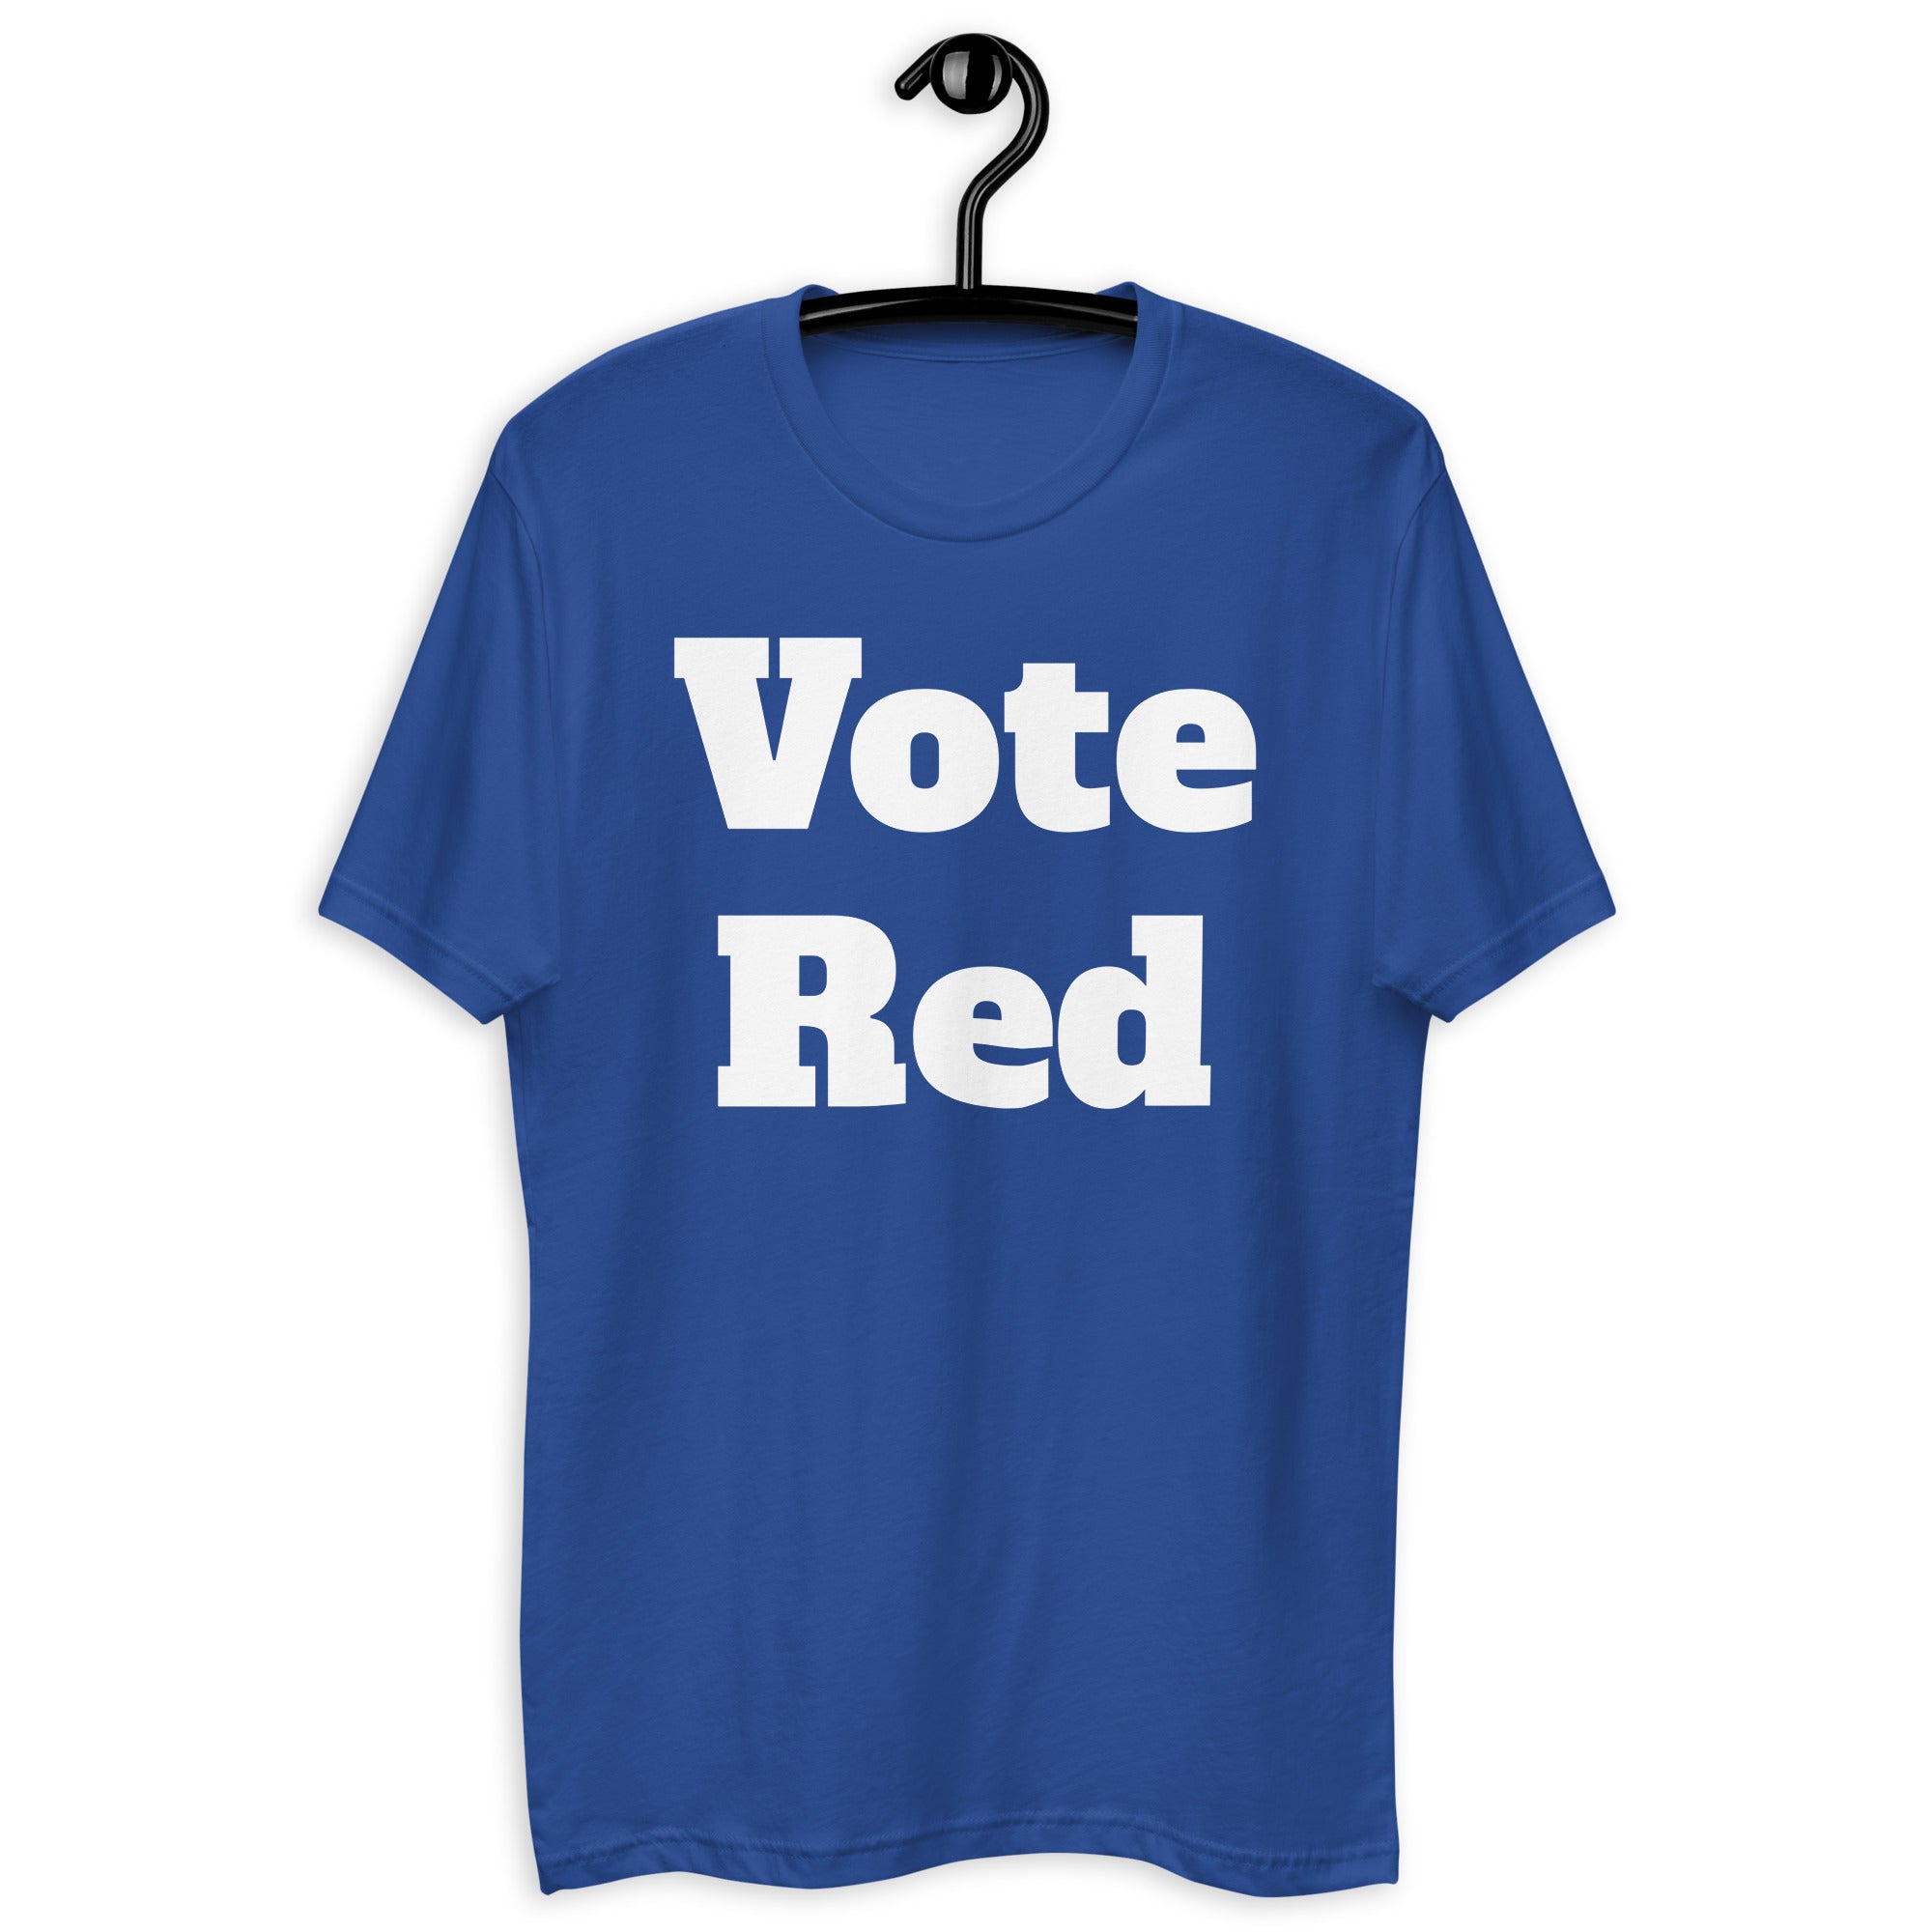 Vote Red Short Sleeve T-shirt